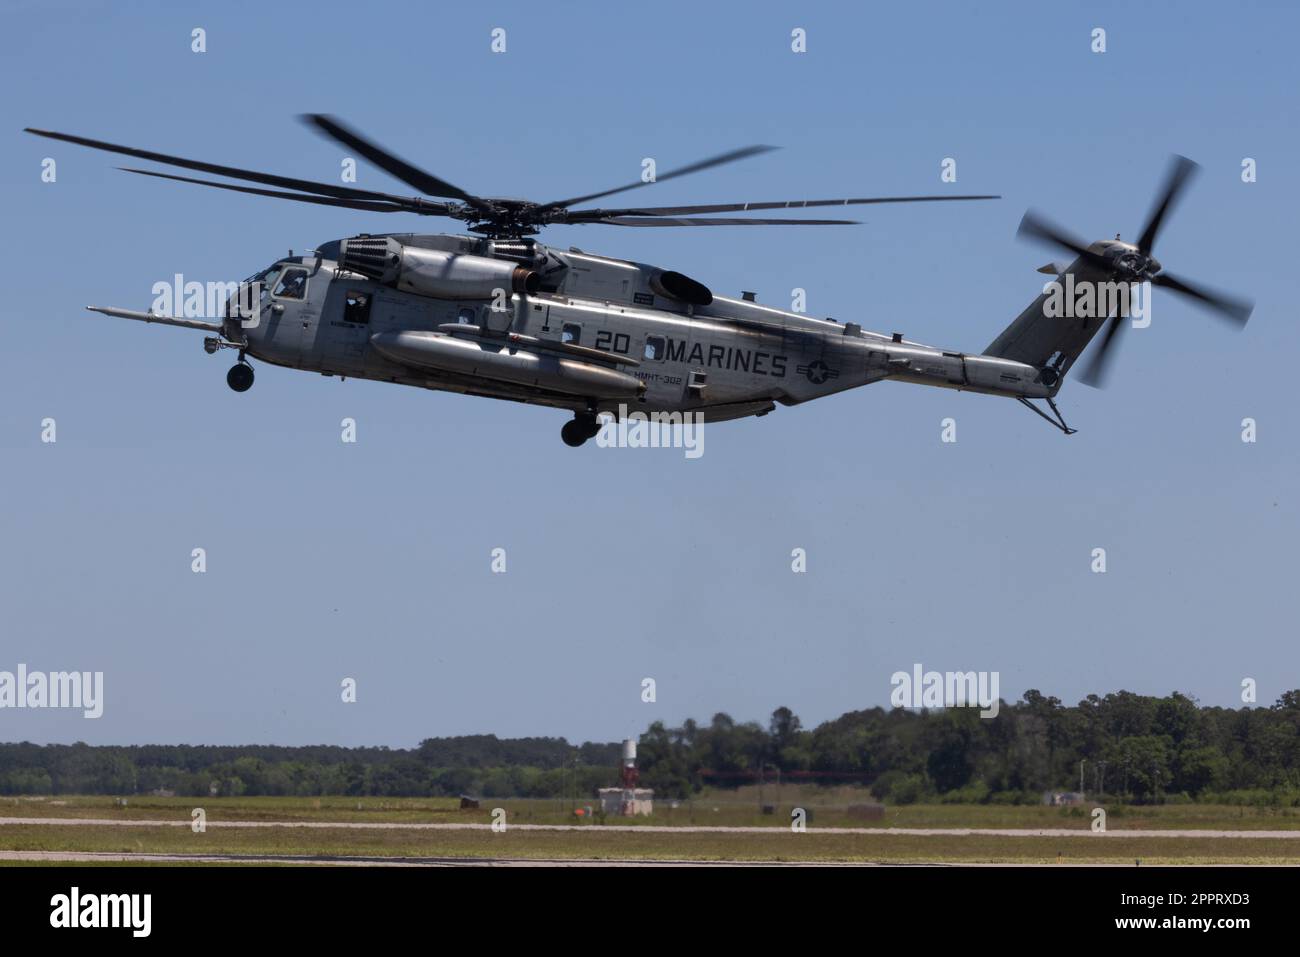 A U.S. Marine Corps CH-53E Super Stallion with Marine Heavy Helicopter Training Squadron 302, 2nd Marine Aircraft Wing, participates in the Marine Marine Air-Ground Task Force (MAGTF) demonstration during the 2023 Beaufort Airshow at Marine Corps Air Station (MCAS) Beaufort, South Carolina, April 23, 2023. The MAGTF is combined of four elements: Command Element, Ground Combat Element, Aviation Combat Element and Logistics Combat Element that work seamlessly together. Within days, a MAGTF can be anywhere in the world and arrive ready to accomplish its mission. The MAGTF is the ideal rapid respo Stock Photo